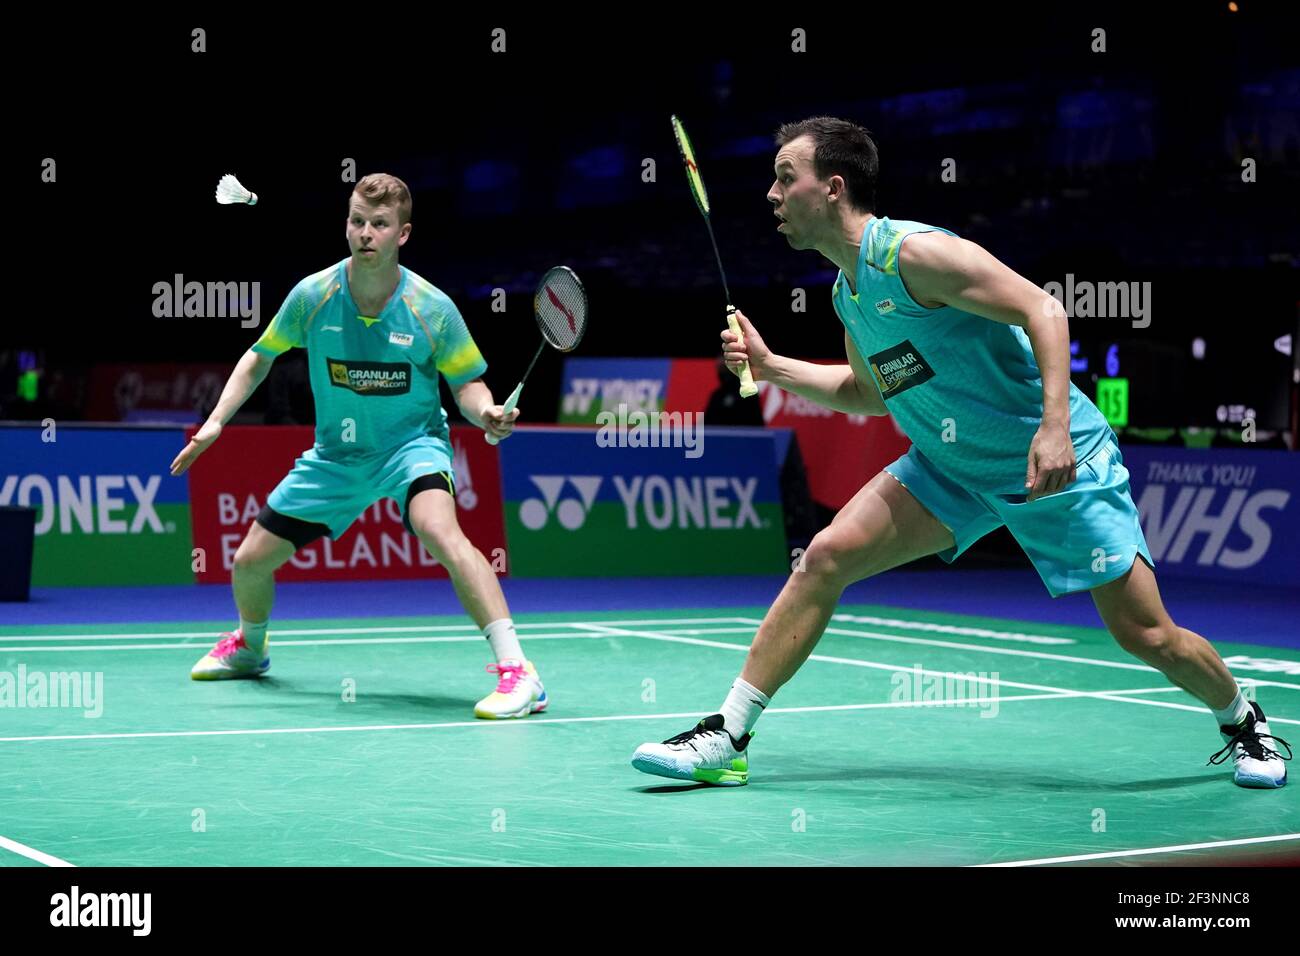 Kim Astrup and Anders Skaarup Rasmussen (right) in action during day one of the YONEX All England Open Badminton Championships at Utilita Arena Birmingham